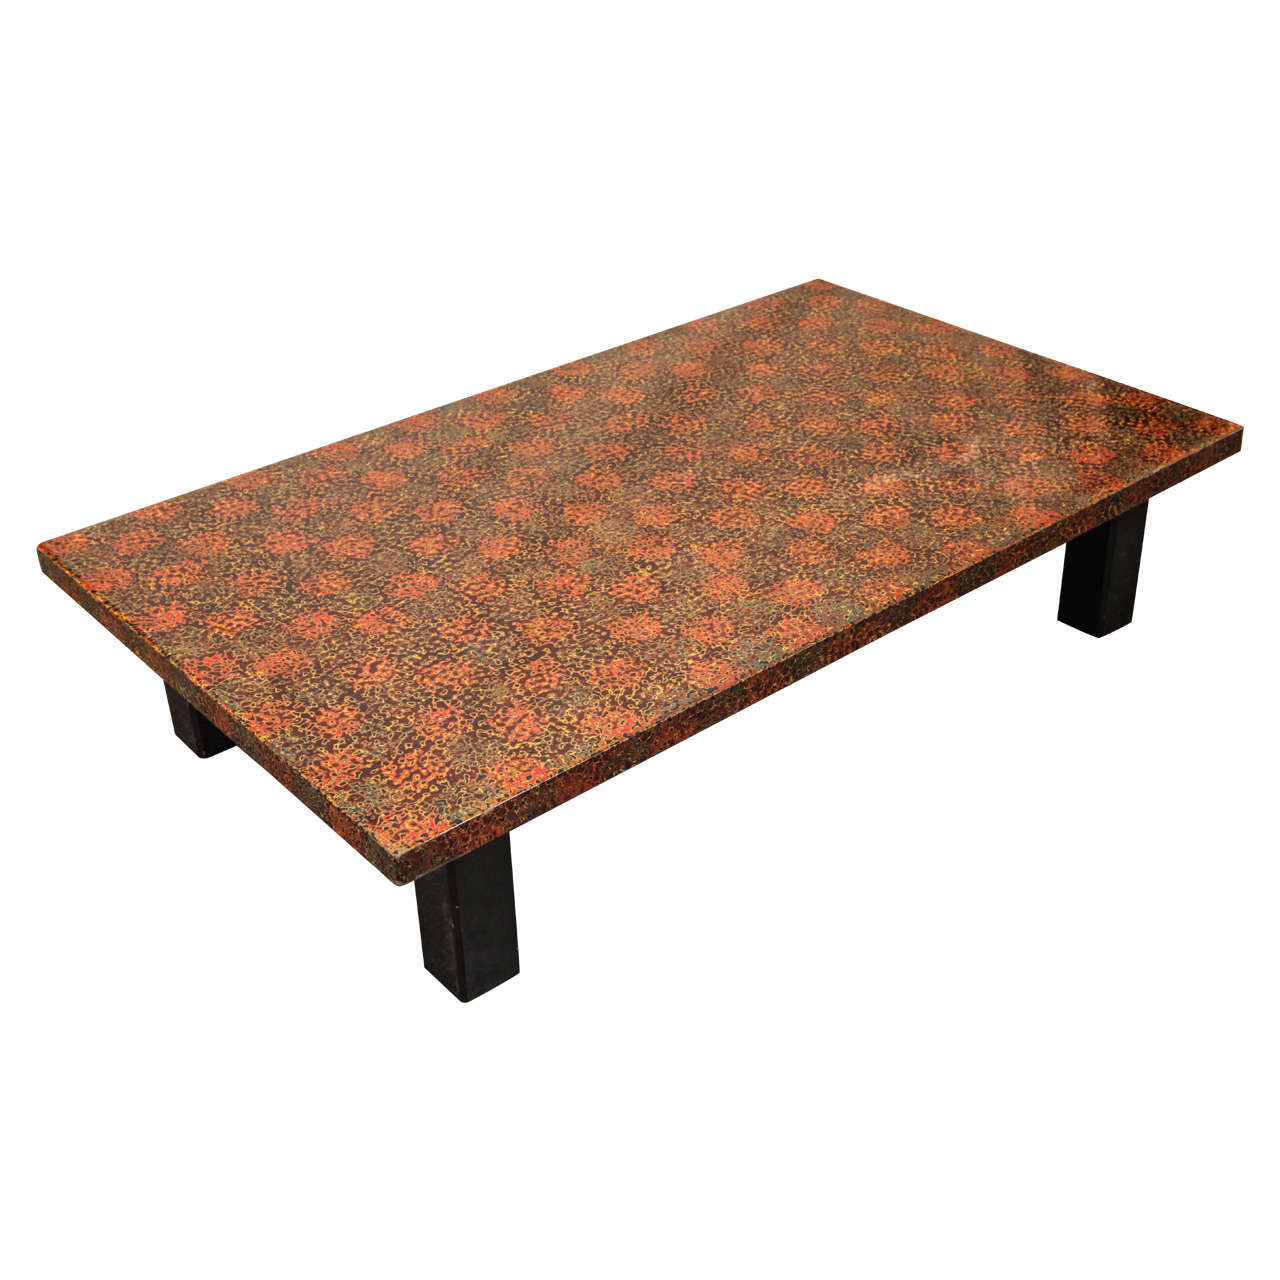 Low Multi-Color Lacquer Top Coffee Table